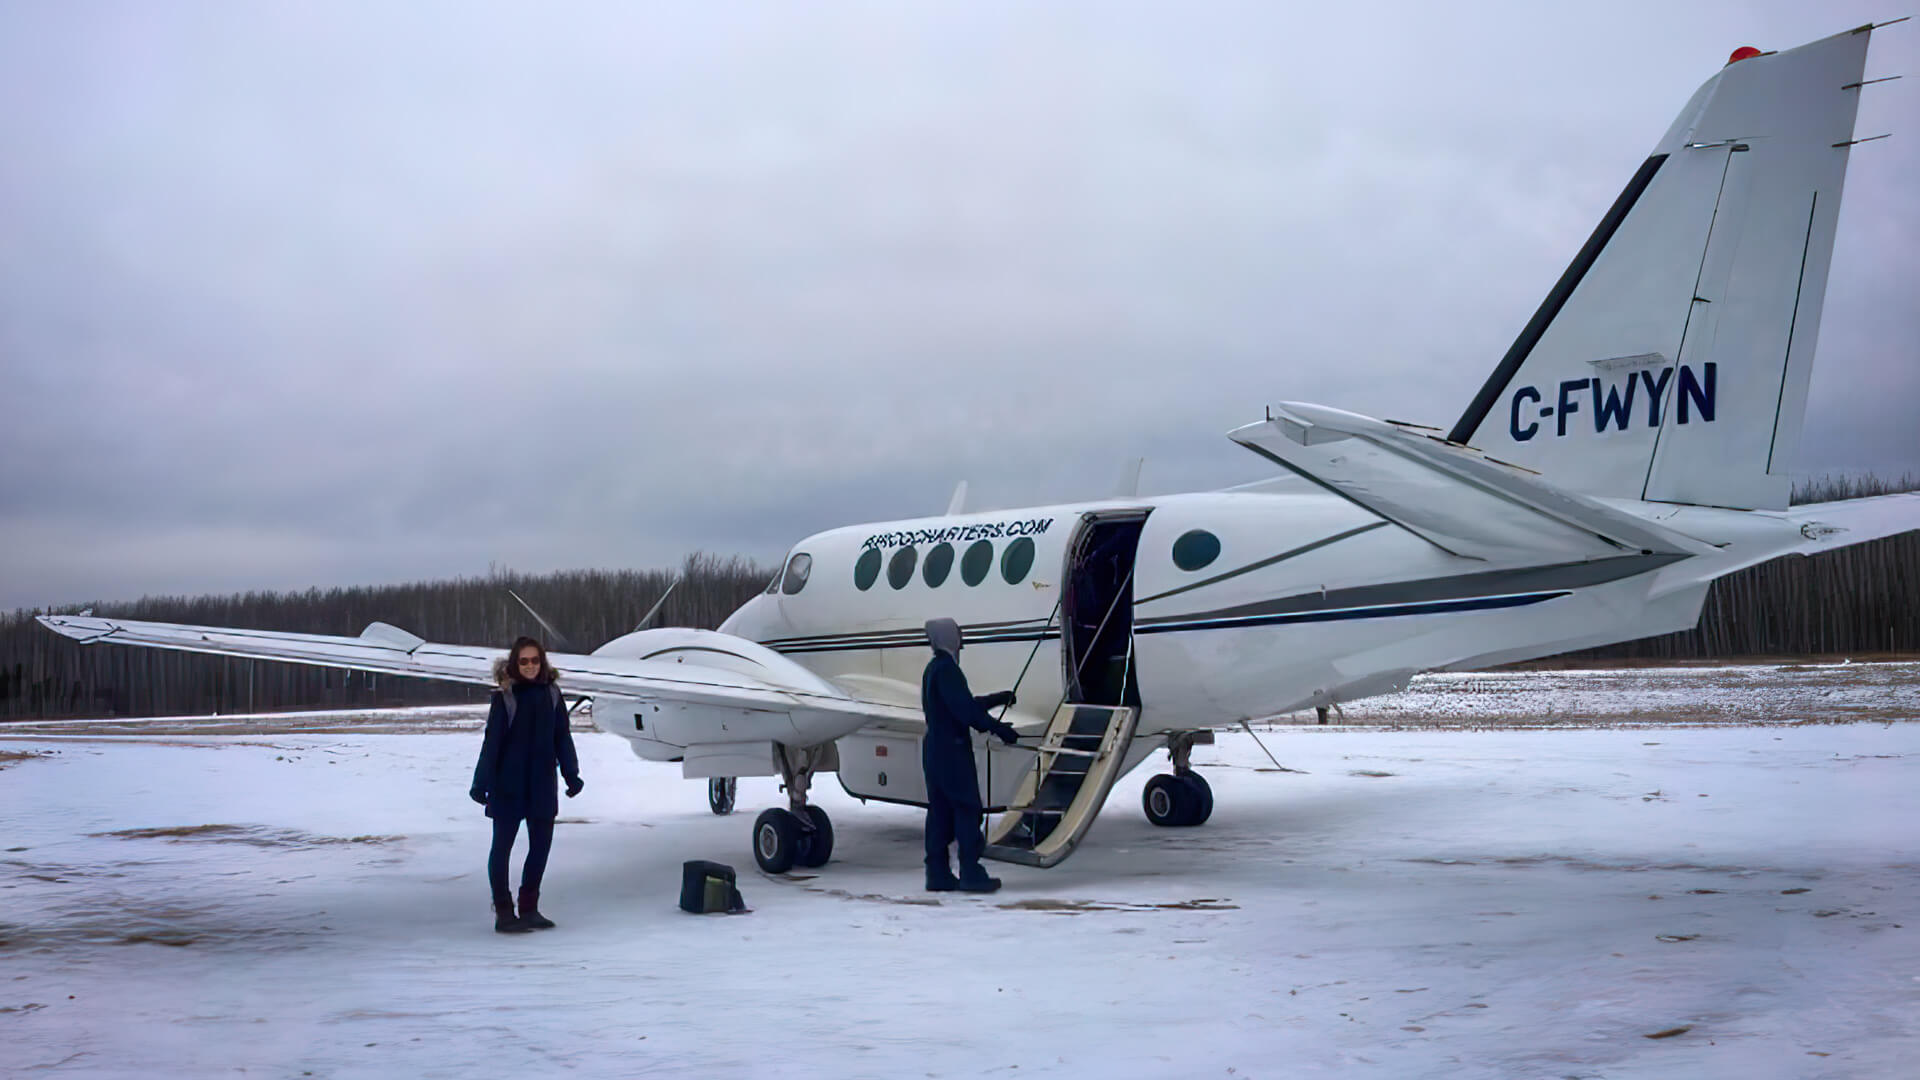 Athabasca University Master of Nursing – Nurse Practitioner grad Kayla Milley about to board a plane at Fox Lake, Alberta during winter.